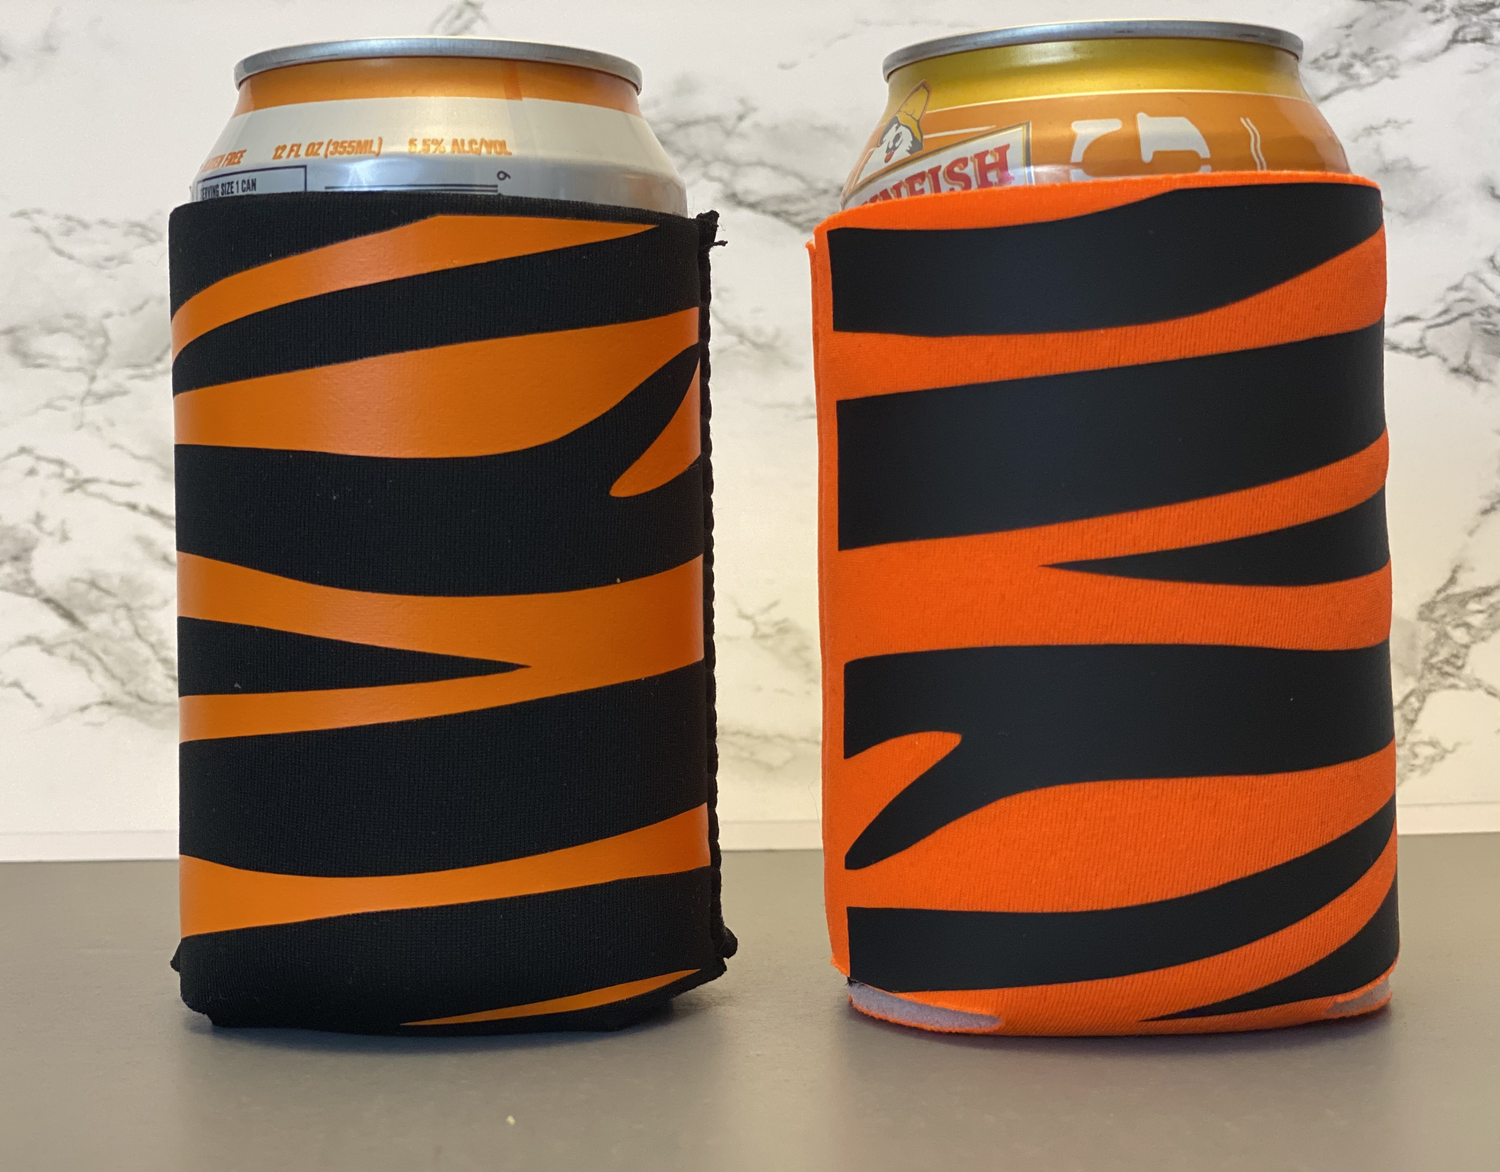 Bengal can cooler 2 pack